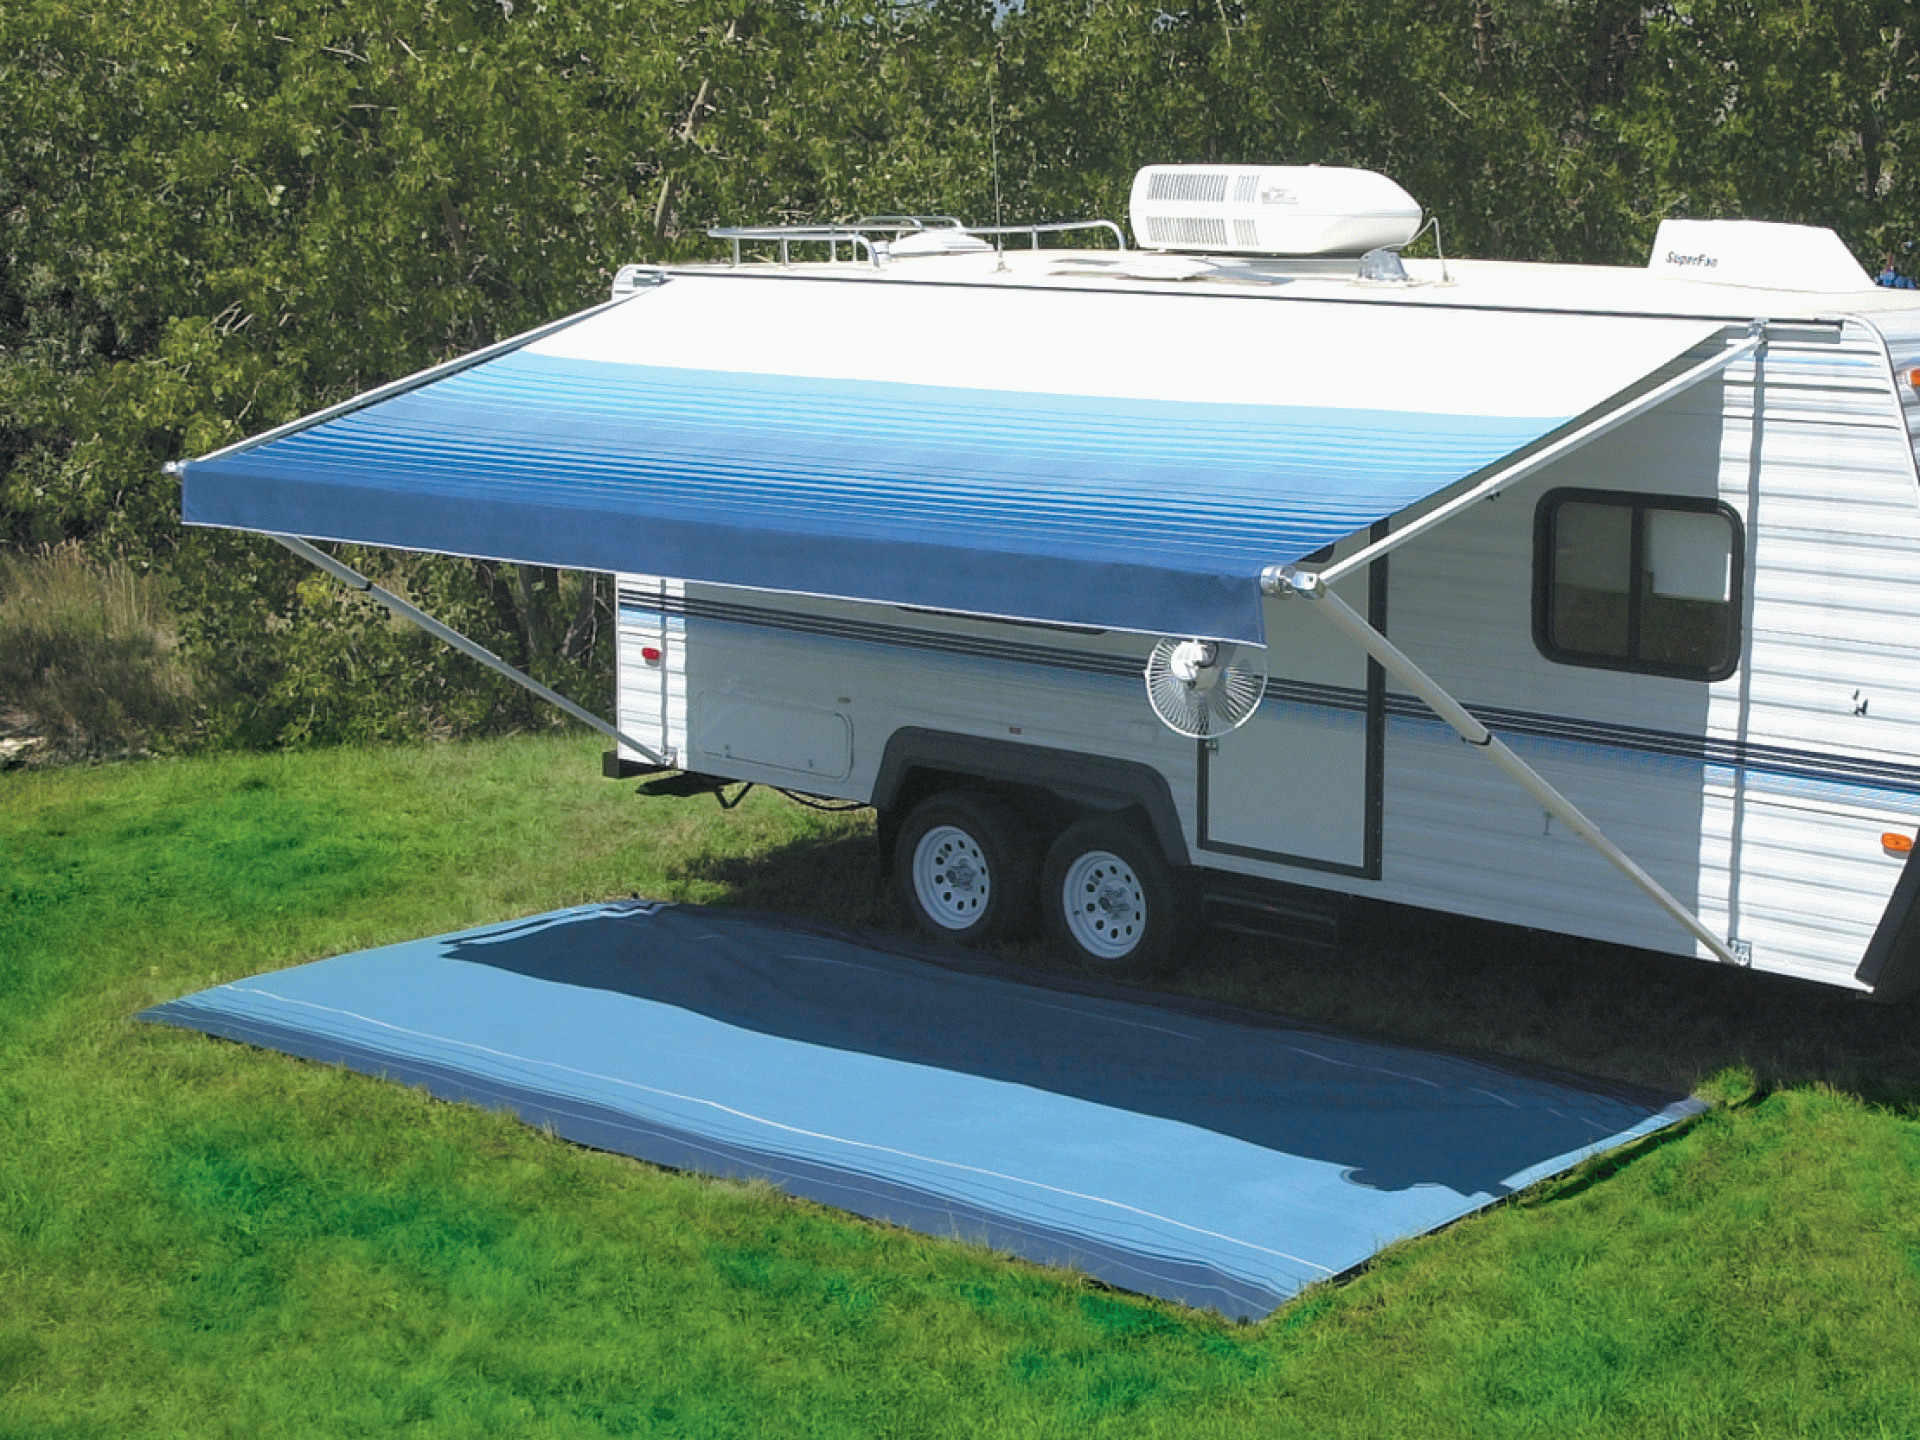 CAREFREE OF COLORADO | 77145500 | SIMPLICITY AWNING 14' BORDEAUX